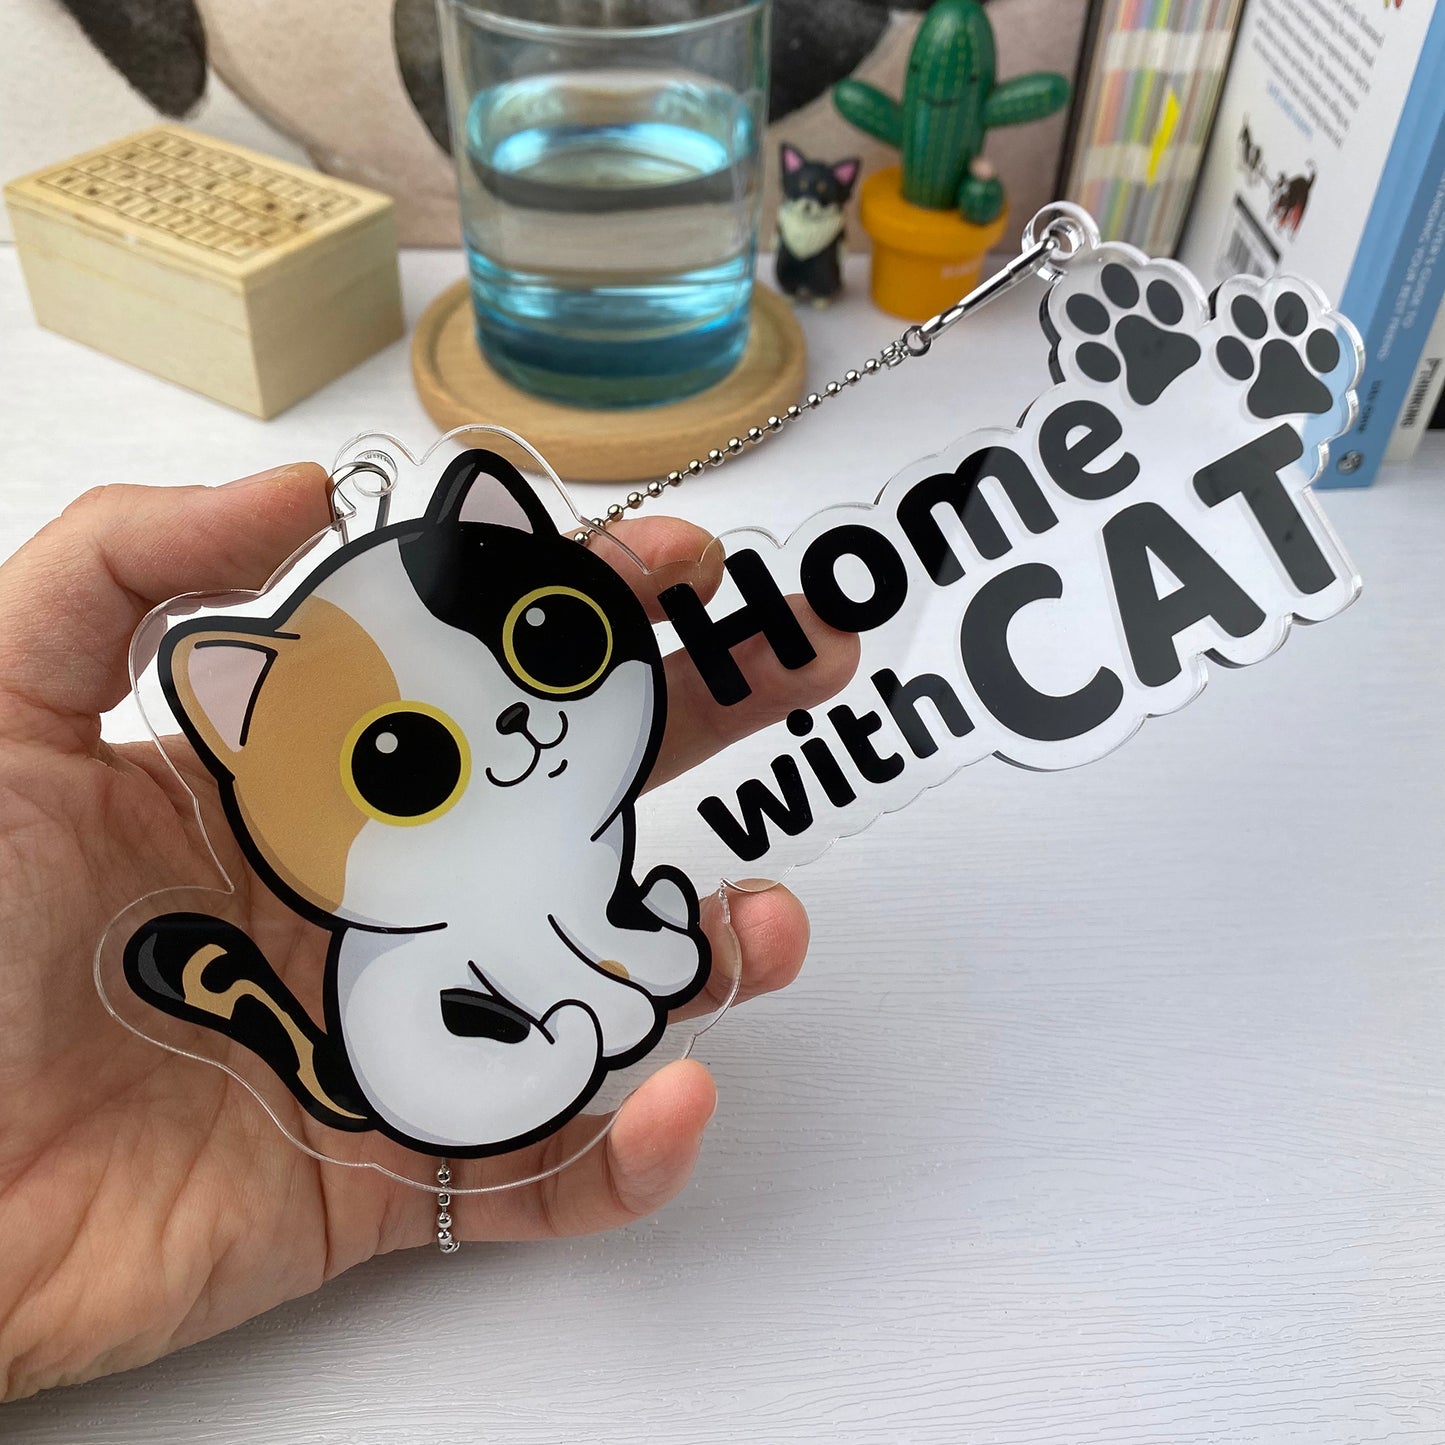 Home with pet 竉物 Transparent cat and dog listing